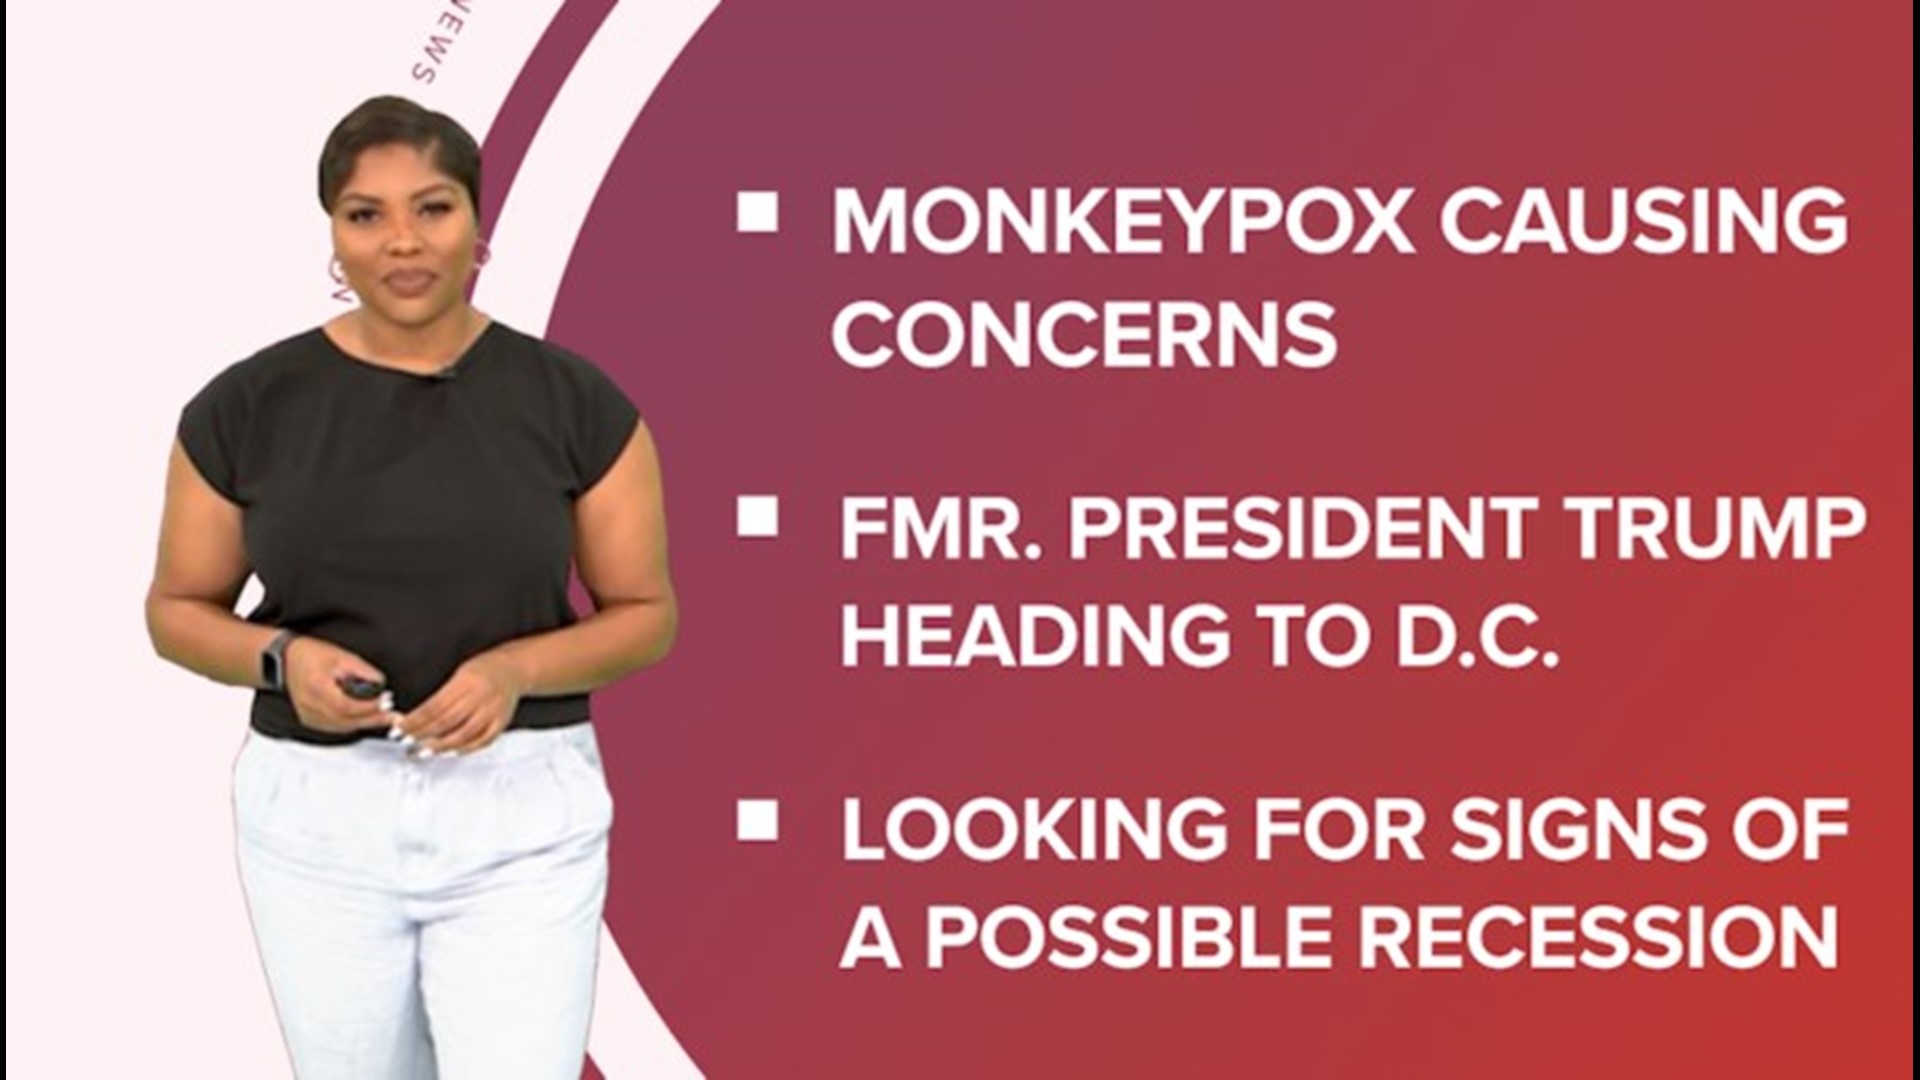 A look at what is happening across the U.S., from a possible monkeypox coordinator at the White House to the Oak fire threatening Yosemite National Park.